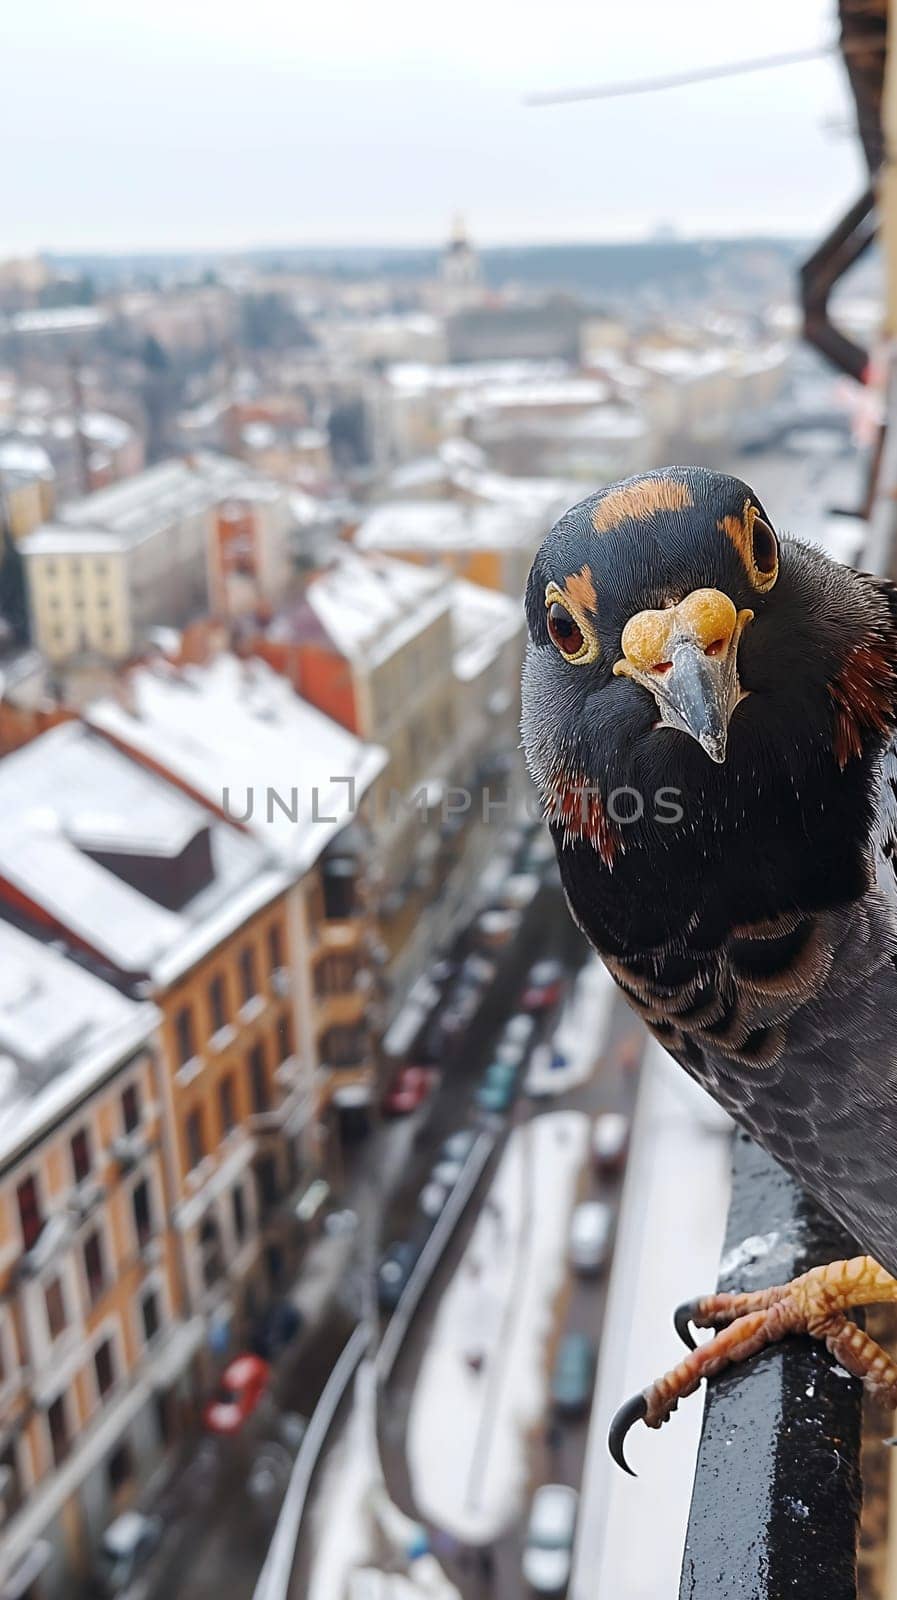 Curious Pigeon Overlooking Snow-Covered Cityscape From a High Vantage Point by chrisroll